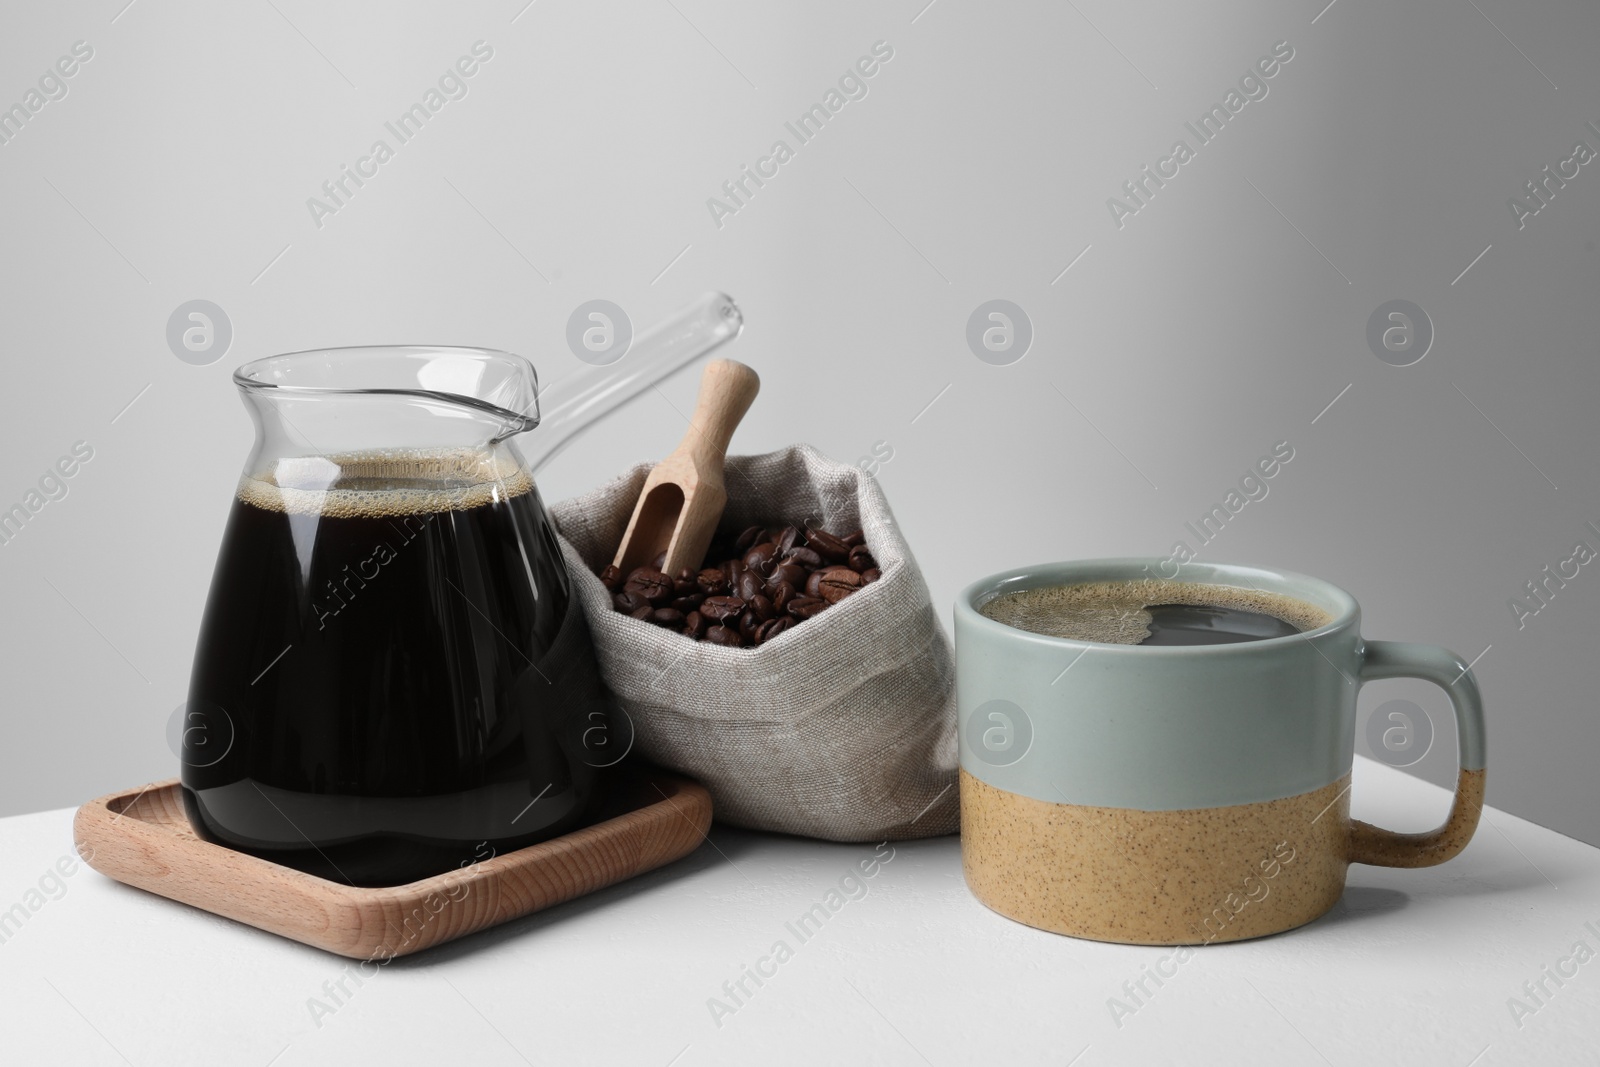 Photo of Turkish coffee. Glass cezve, cup and bag of beans on white table